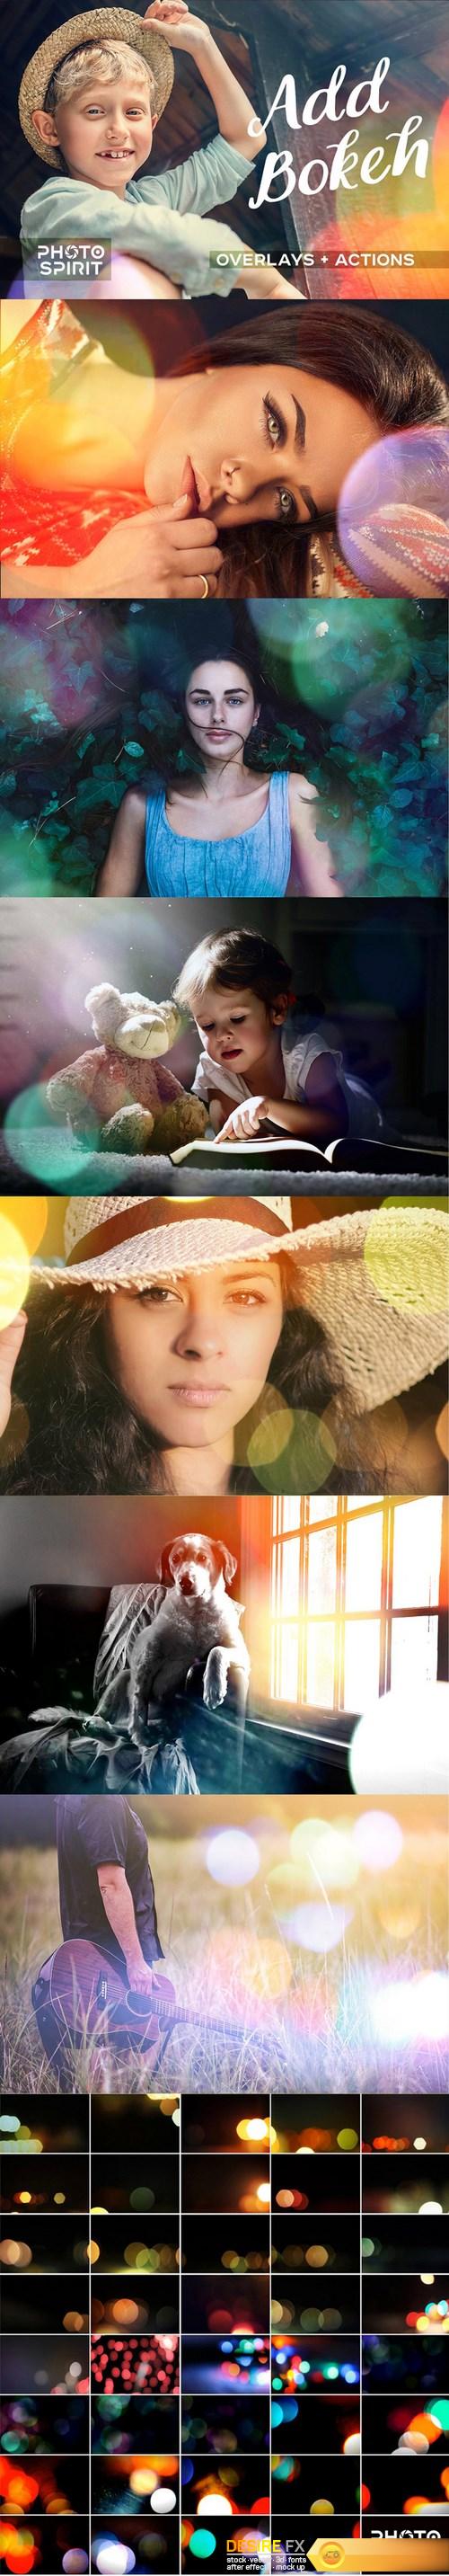 graphicriver-21004615-add-bokeh-overlay-photoshop-actions